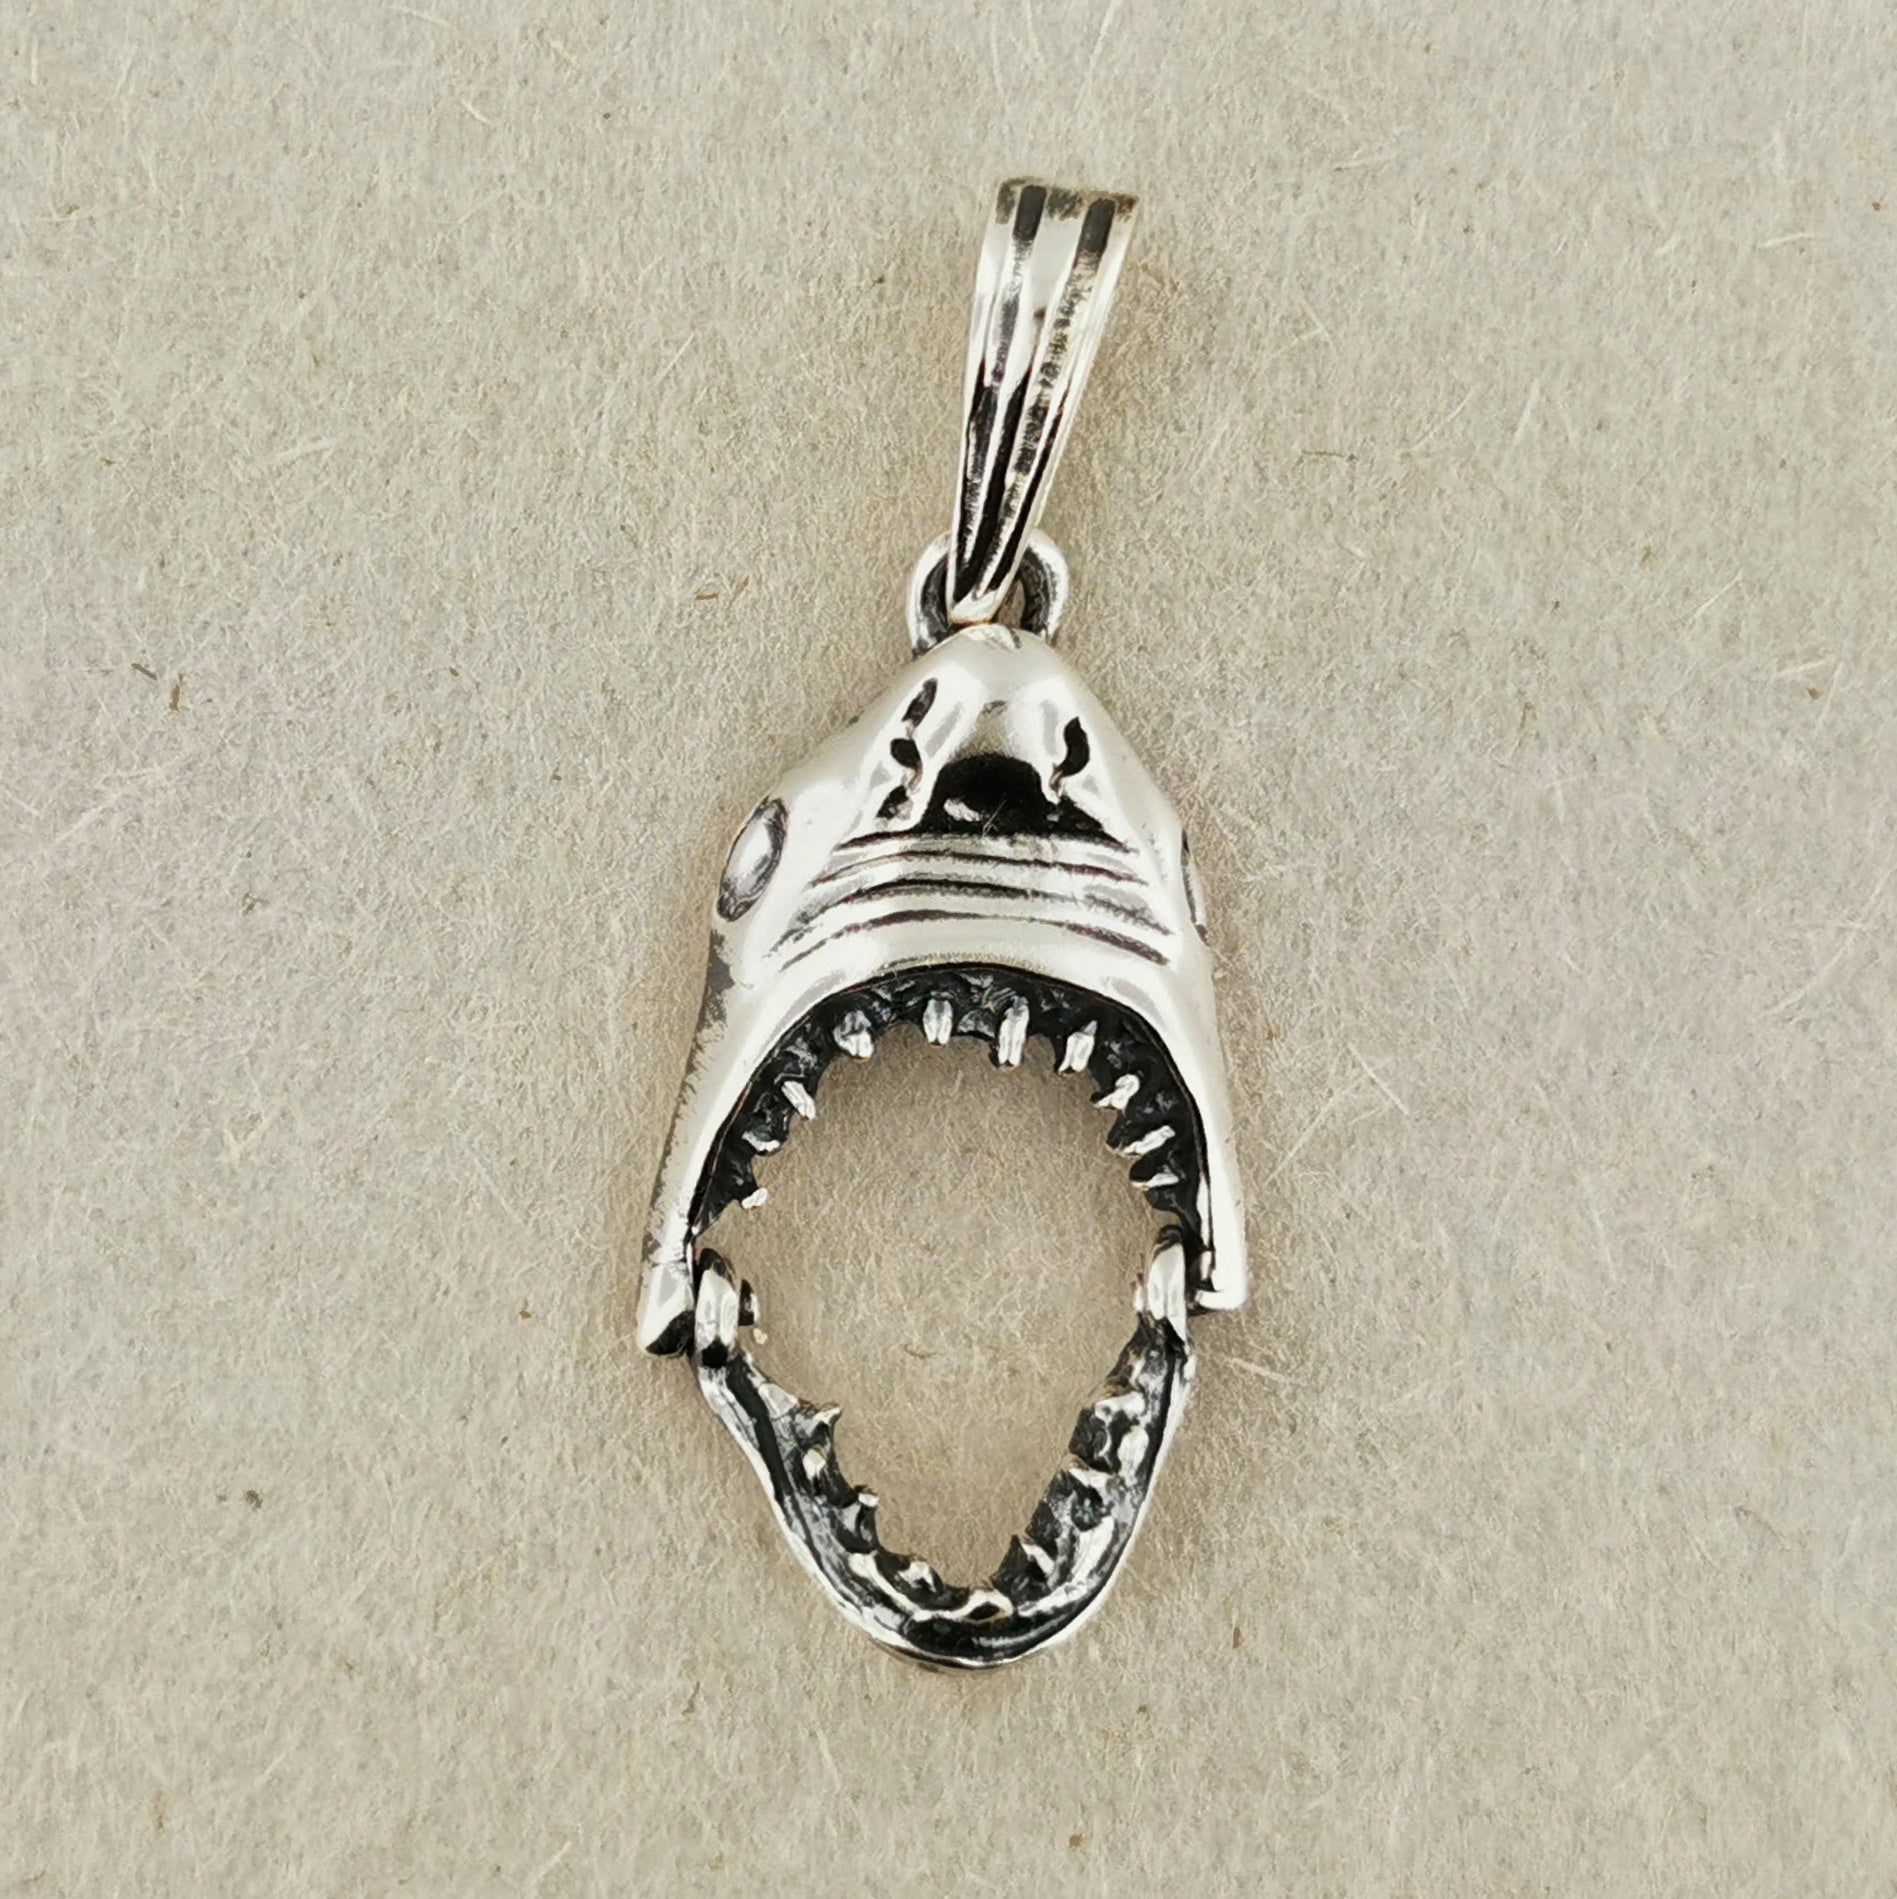 Shark Head Pendant in 925 Sterling Silver or Antique Bronze, Shark Jaws Necklace Jewelry, Great White Jewellery, Gift for Shark Lover, Great White Shark Pendant, Silver Shark Pendant, Silver Shark Jewelry, Silver JAWS Pendant, Shark Lover Pendant